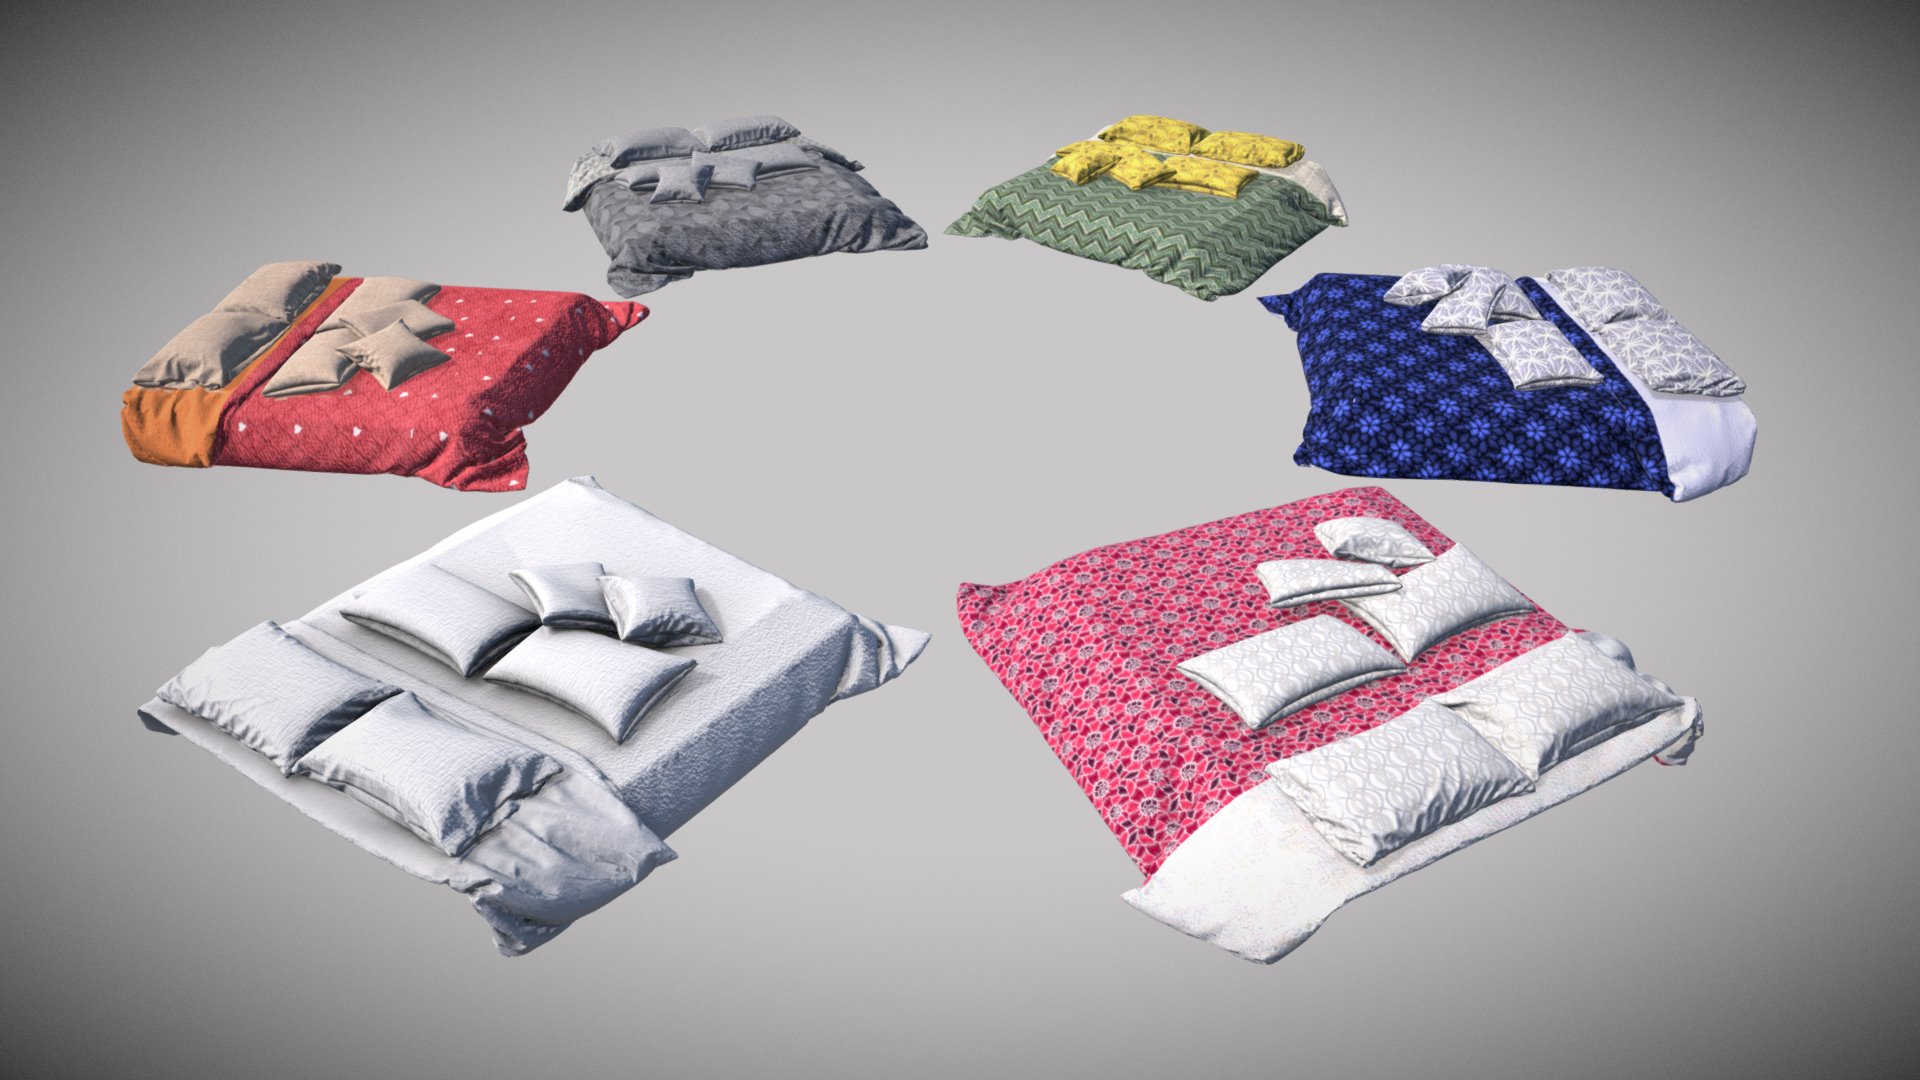 3D model Bed One Material Series - This is a 3D model of the Bed One Material Series. The 3D model is about a group of folded shirts.